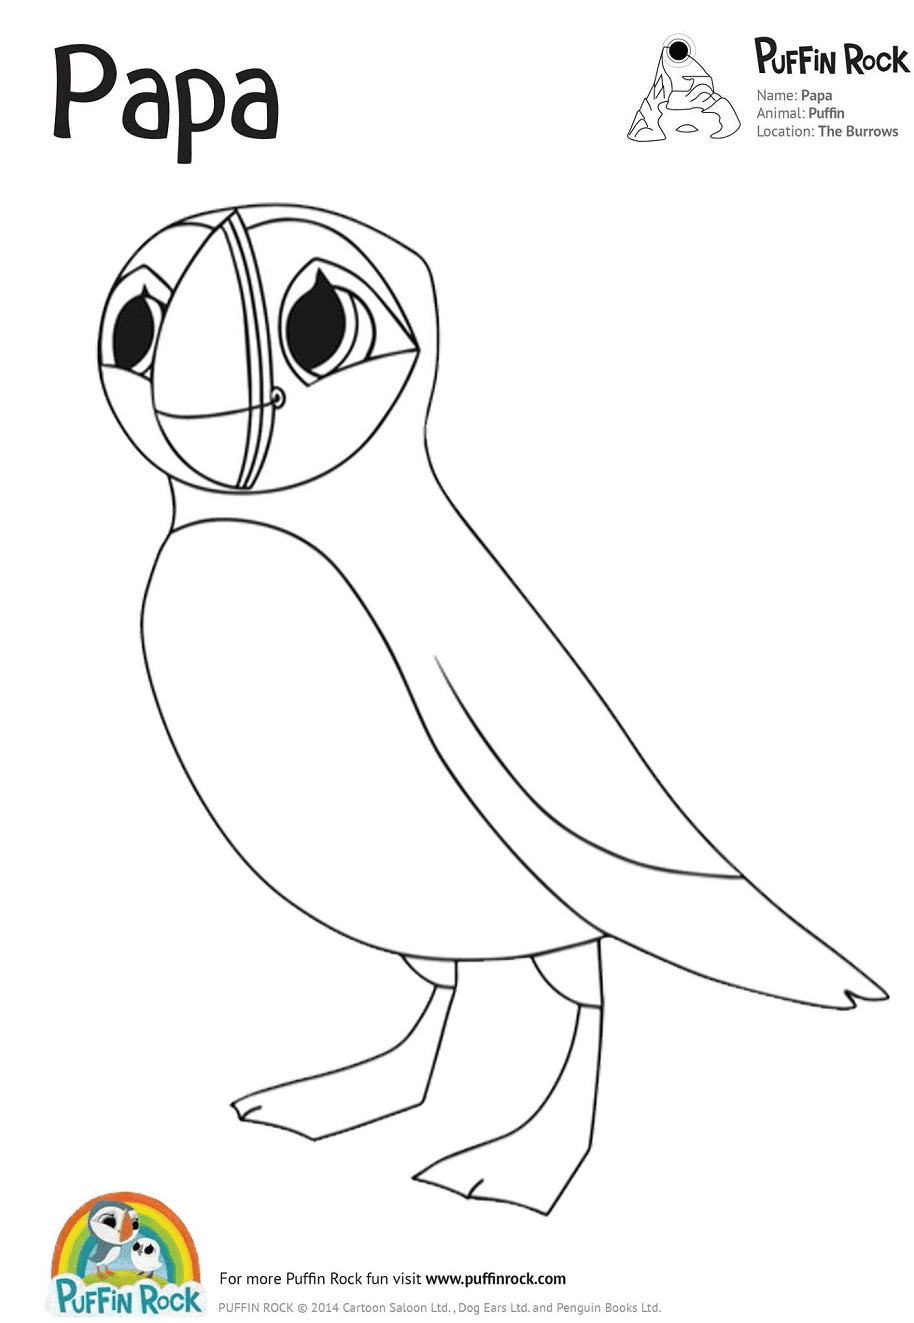 Puffin rock coloring pages printable for free download